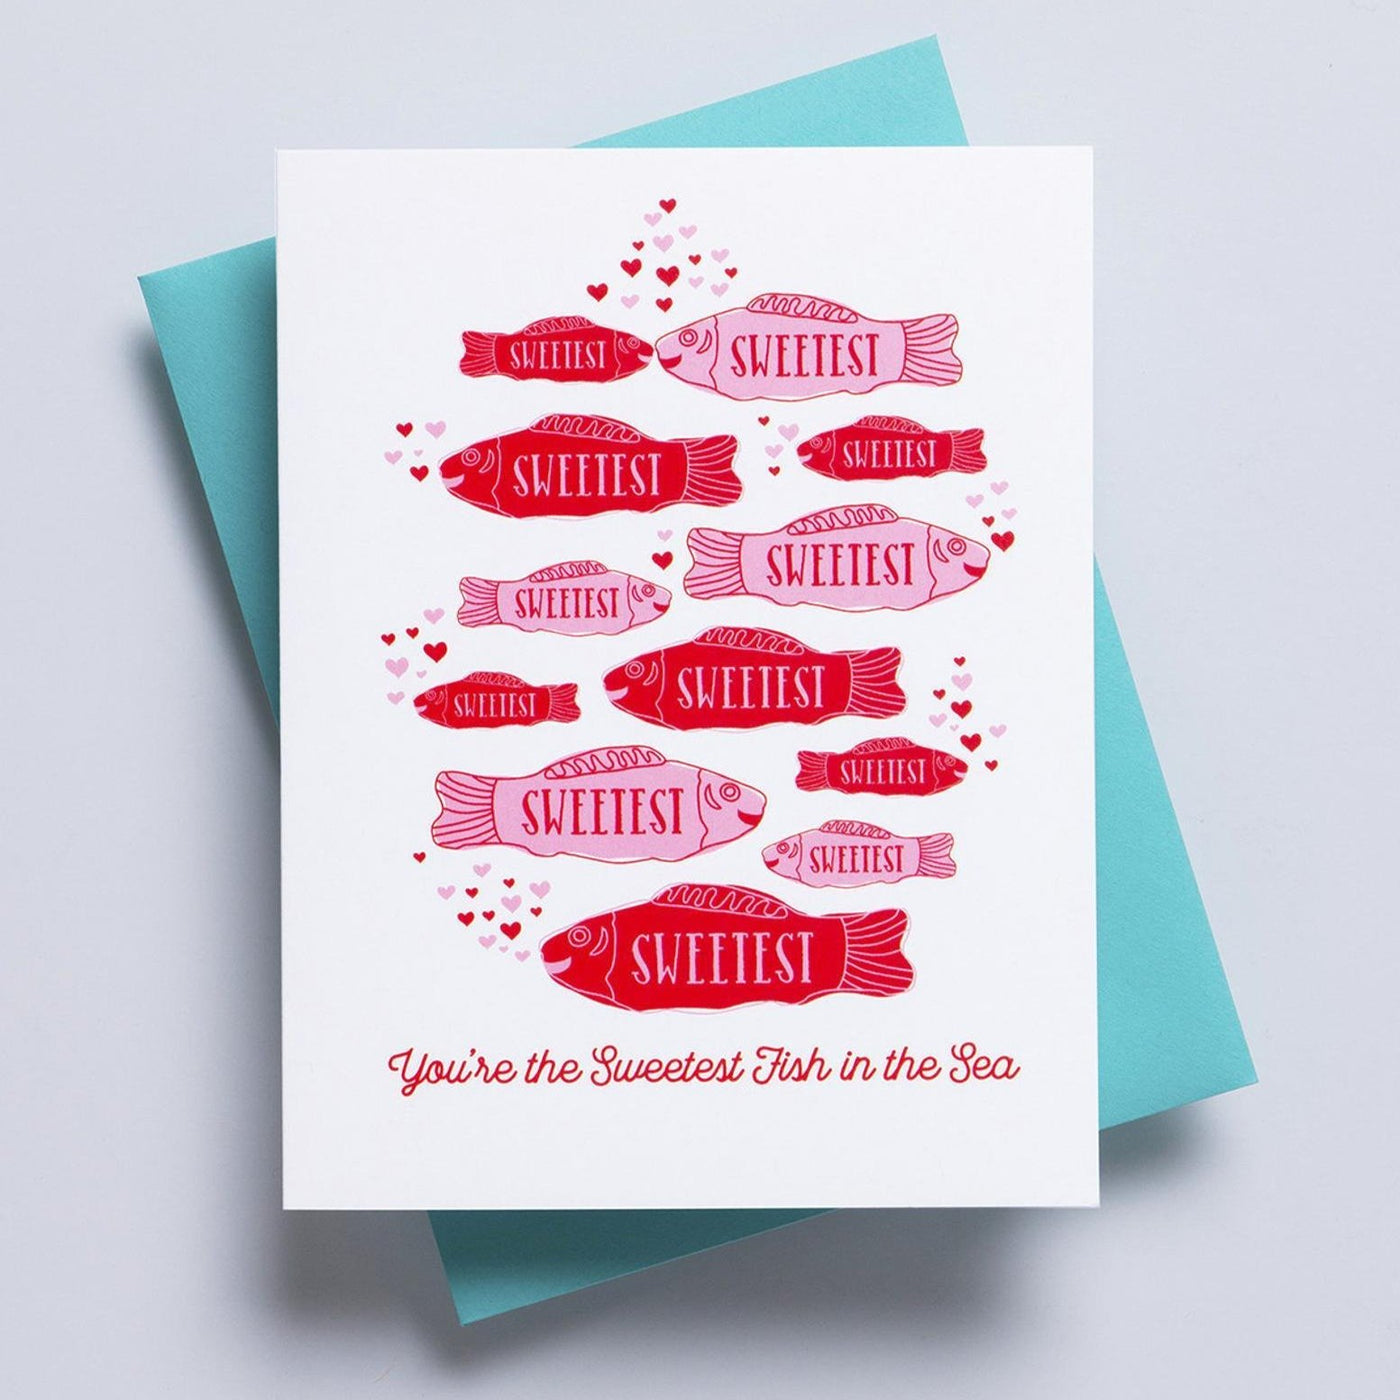 A white valentines greeting card with images of 'sweetest fish' in red a pink on the face of the card and the text 'you're the sweetest fish in the sea' written on the bottom. 